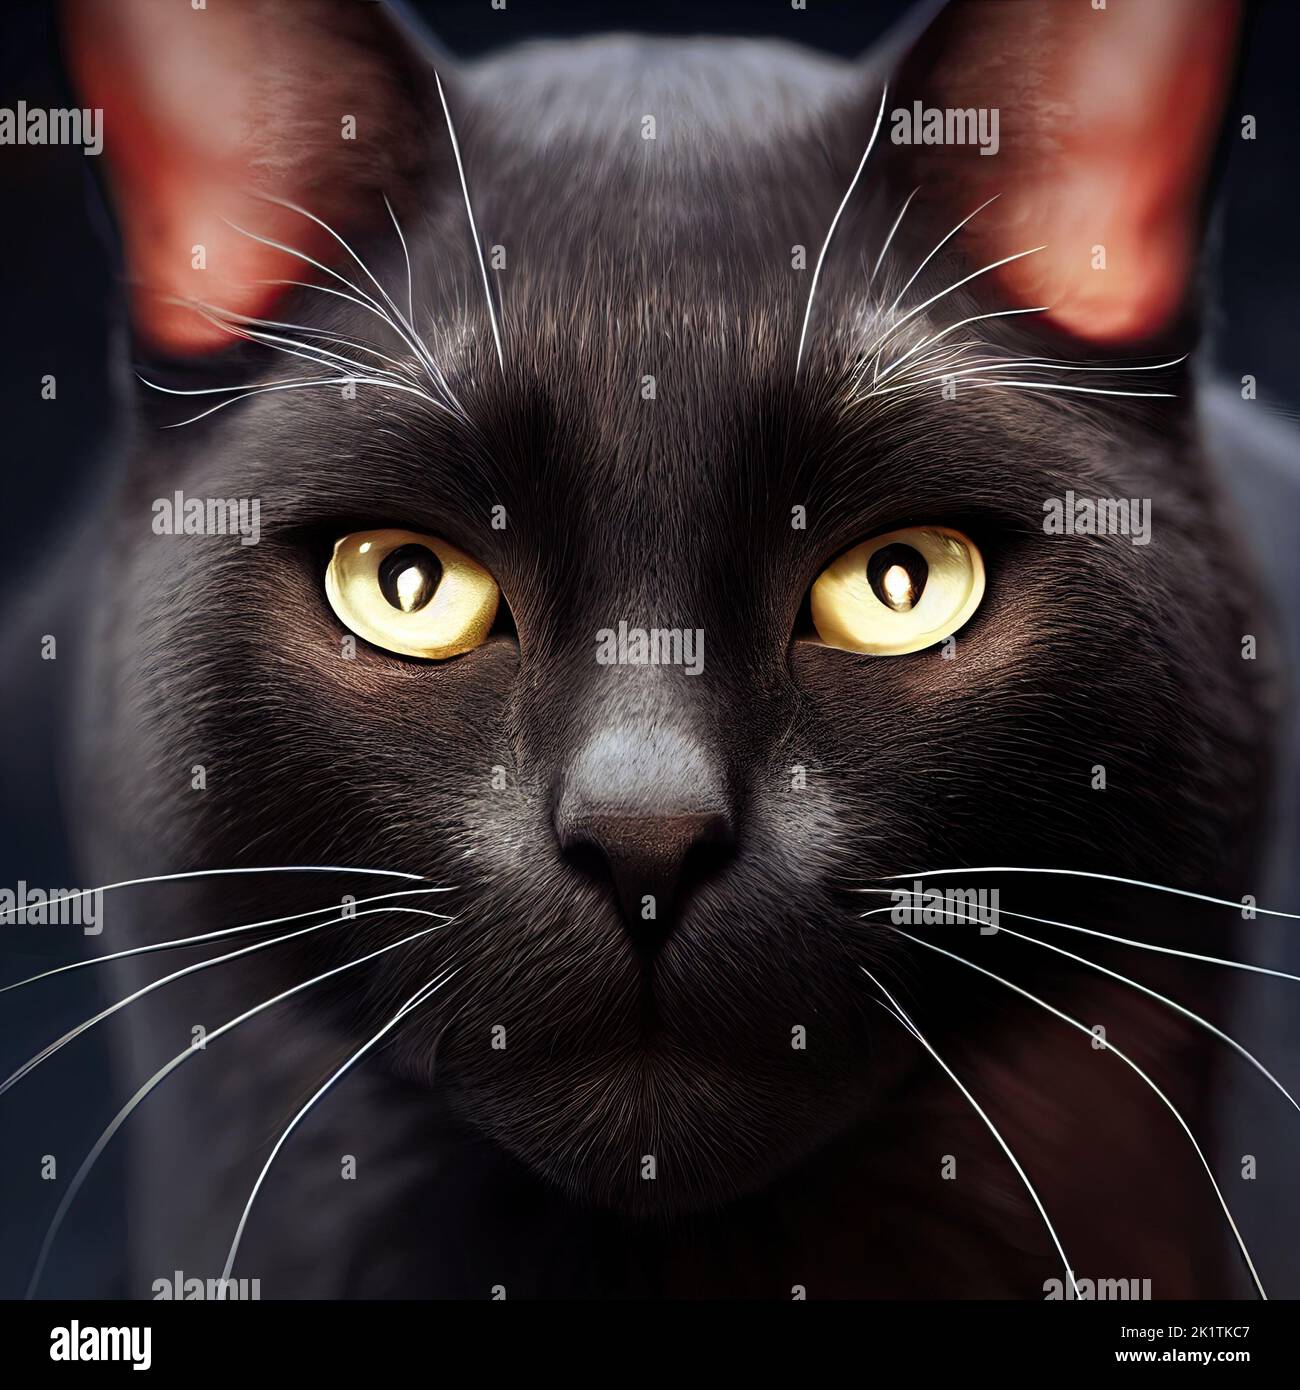 A close-up of a black cat's eyes on a black background. Halloween and horror atmospheres are portrayed. Evil eyes of panthers and witches. unlucky and Stock Photo